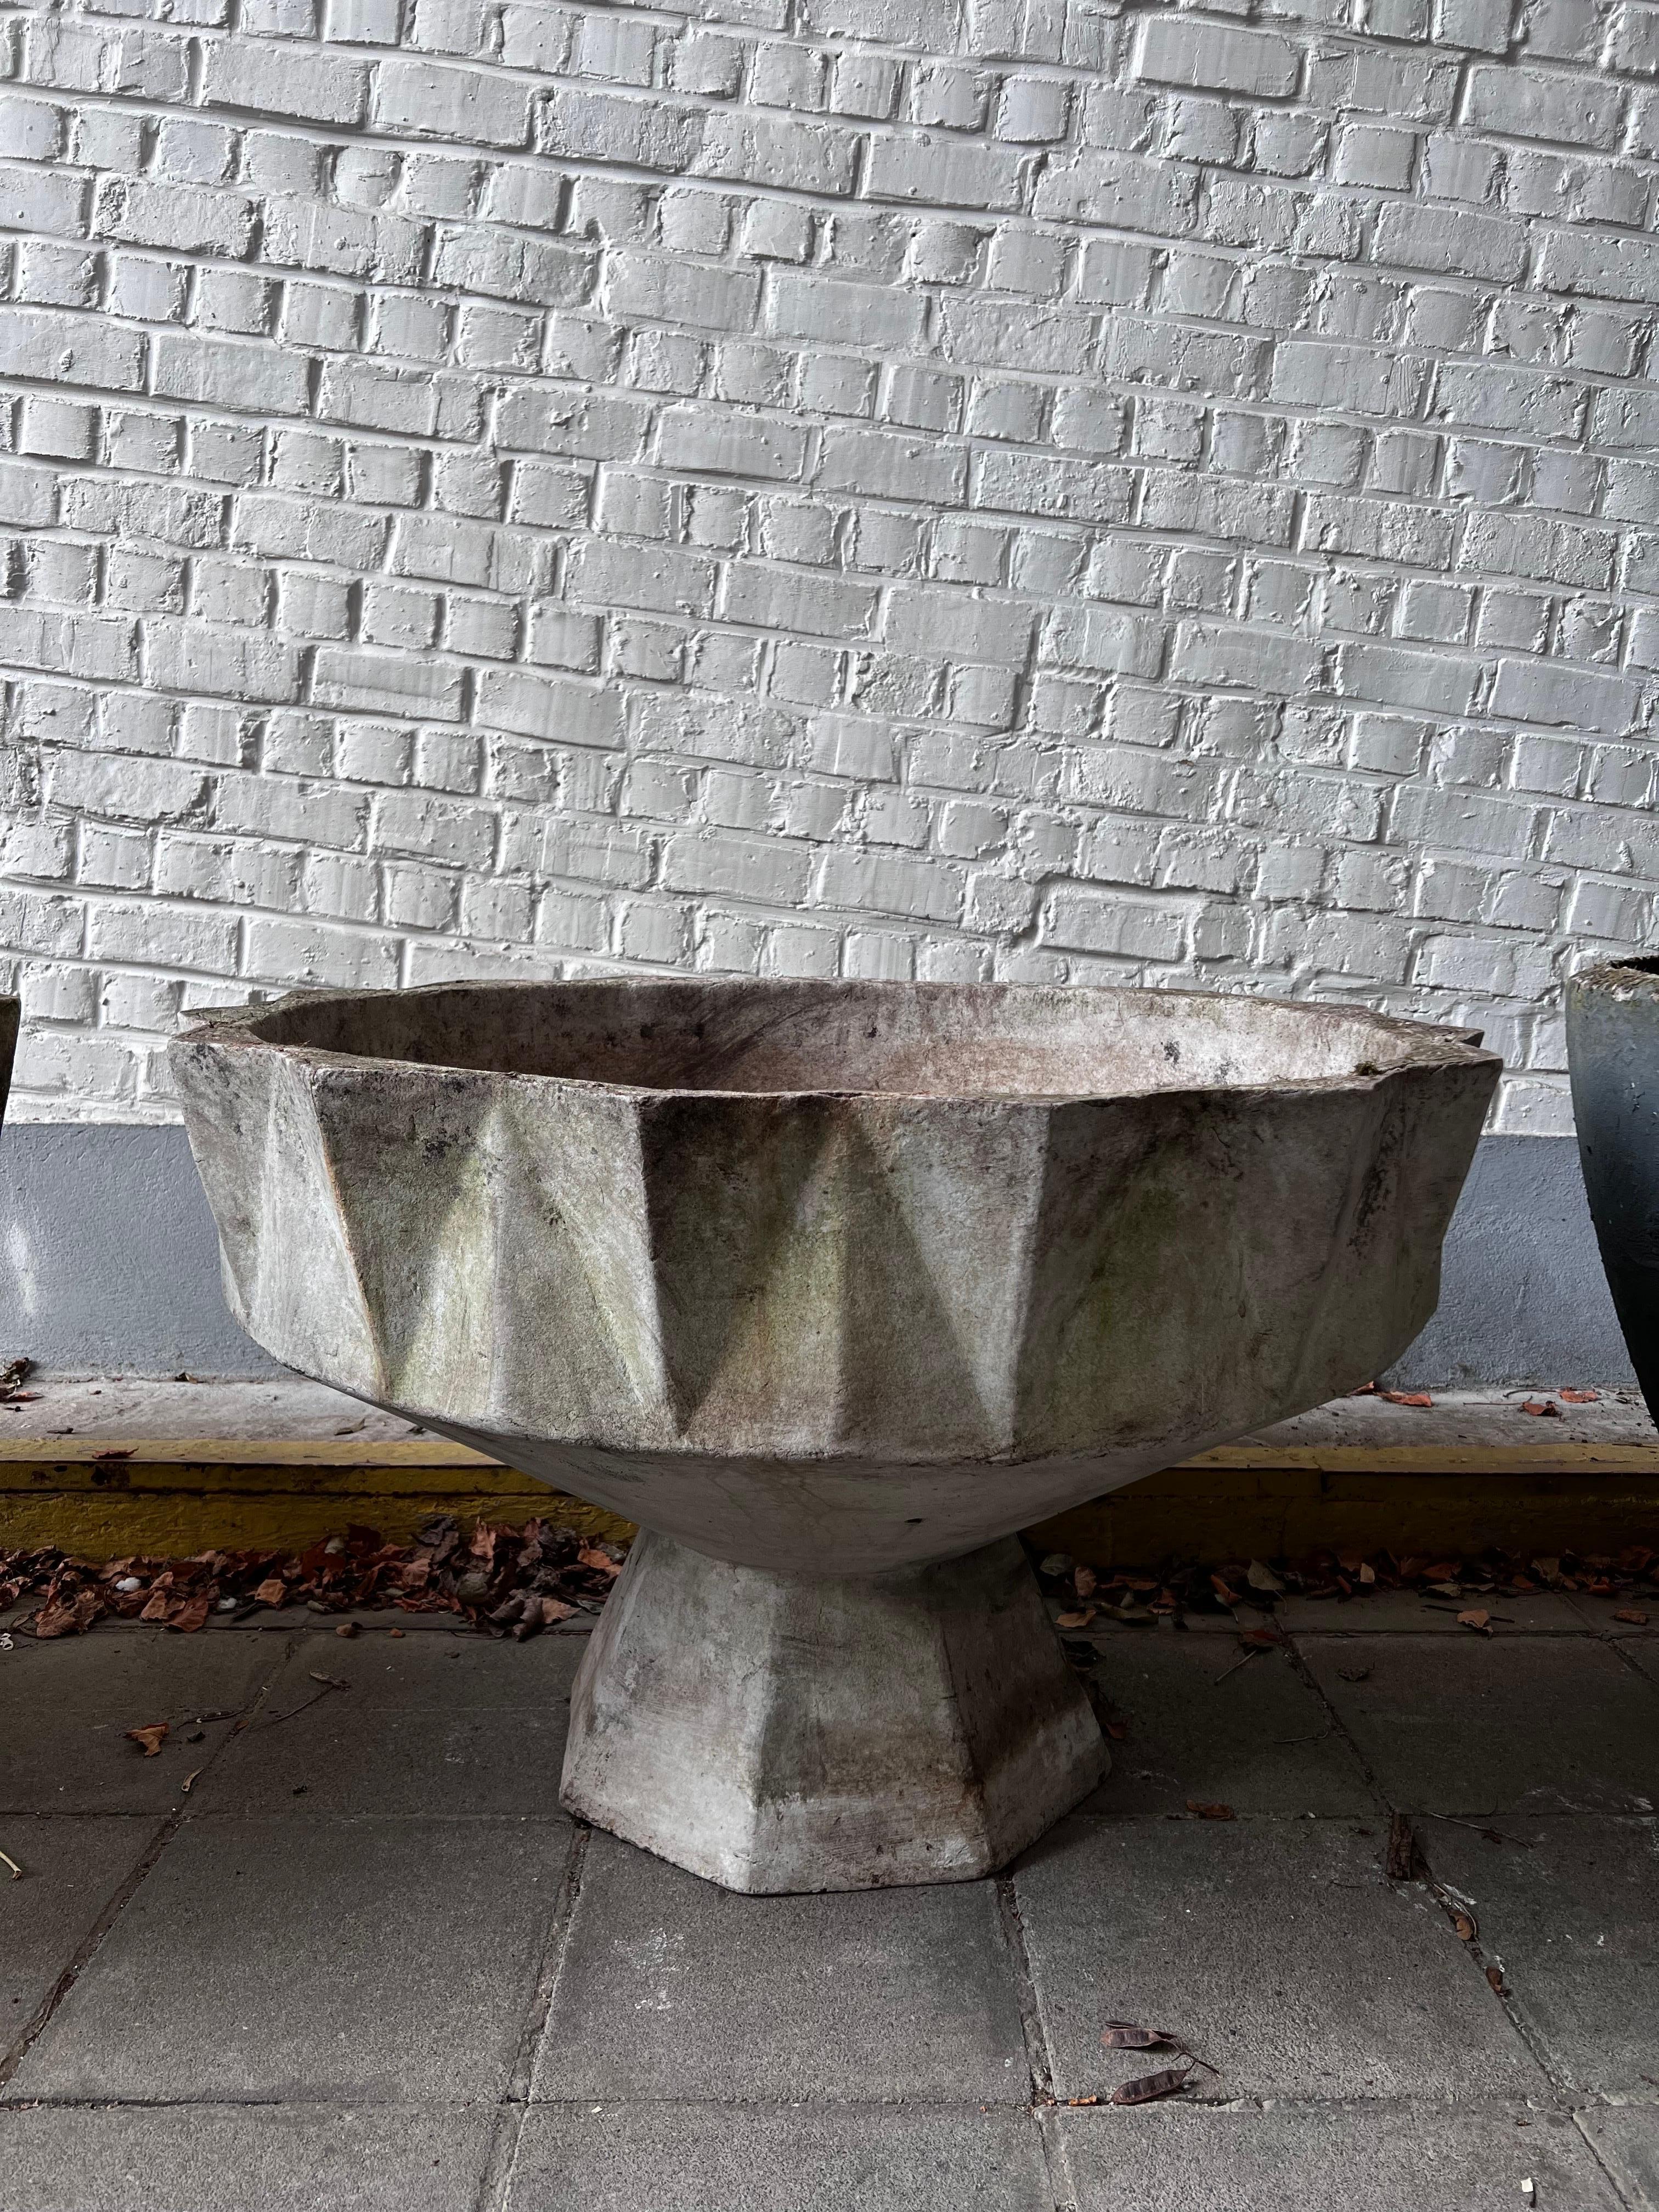 This is a planter like a sculpture! made out of fiber concrete in the 1950's in Switzerland. It is the biggest and strongest from that series. We have two of that model and measurements. We have more models in smaller